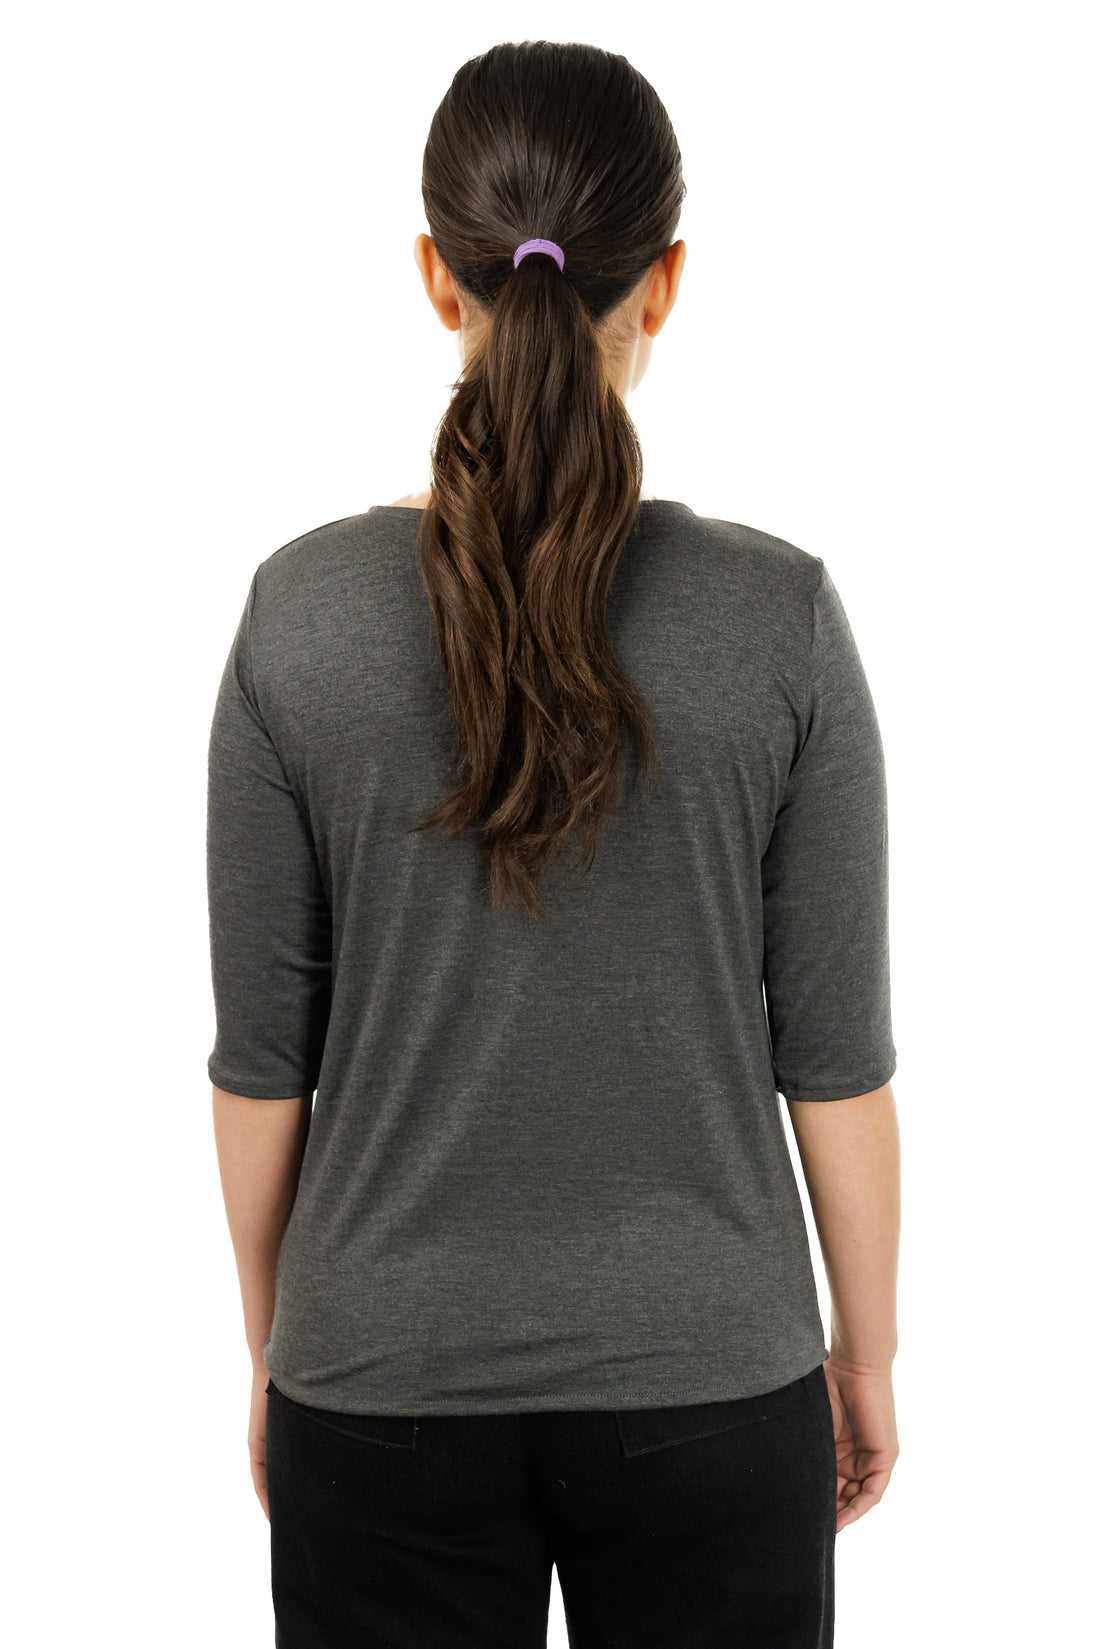 Gray Thistle 3/4 Sleeve Top